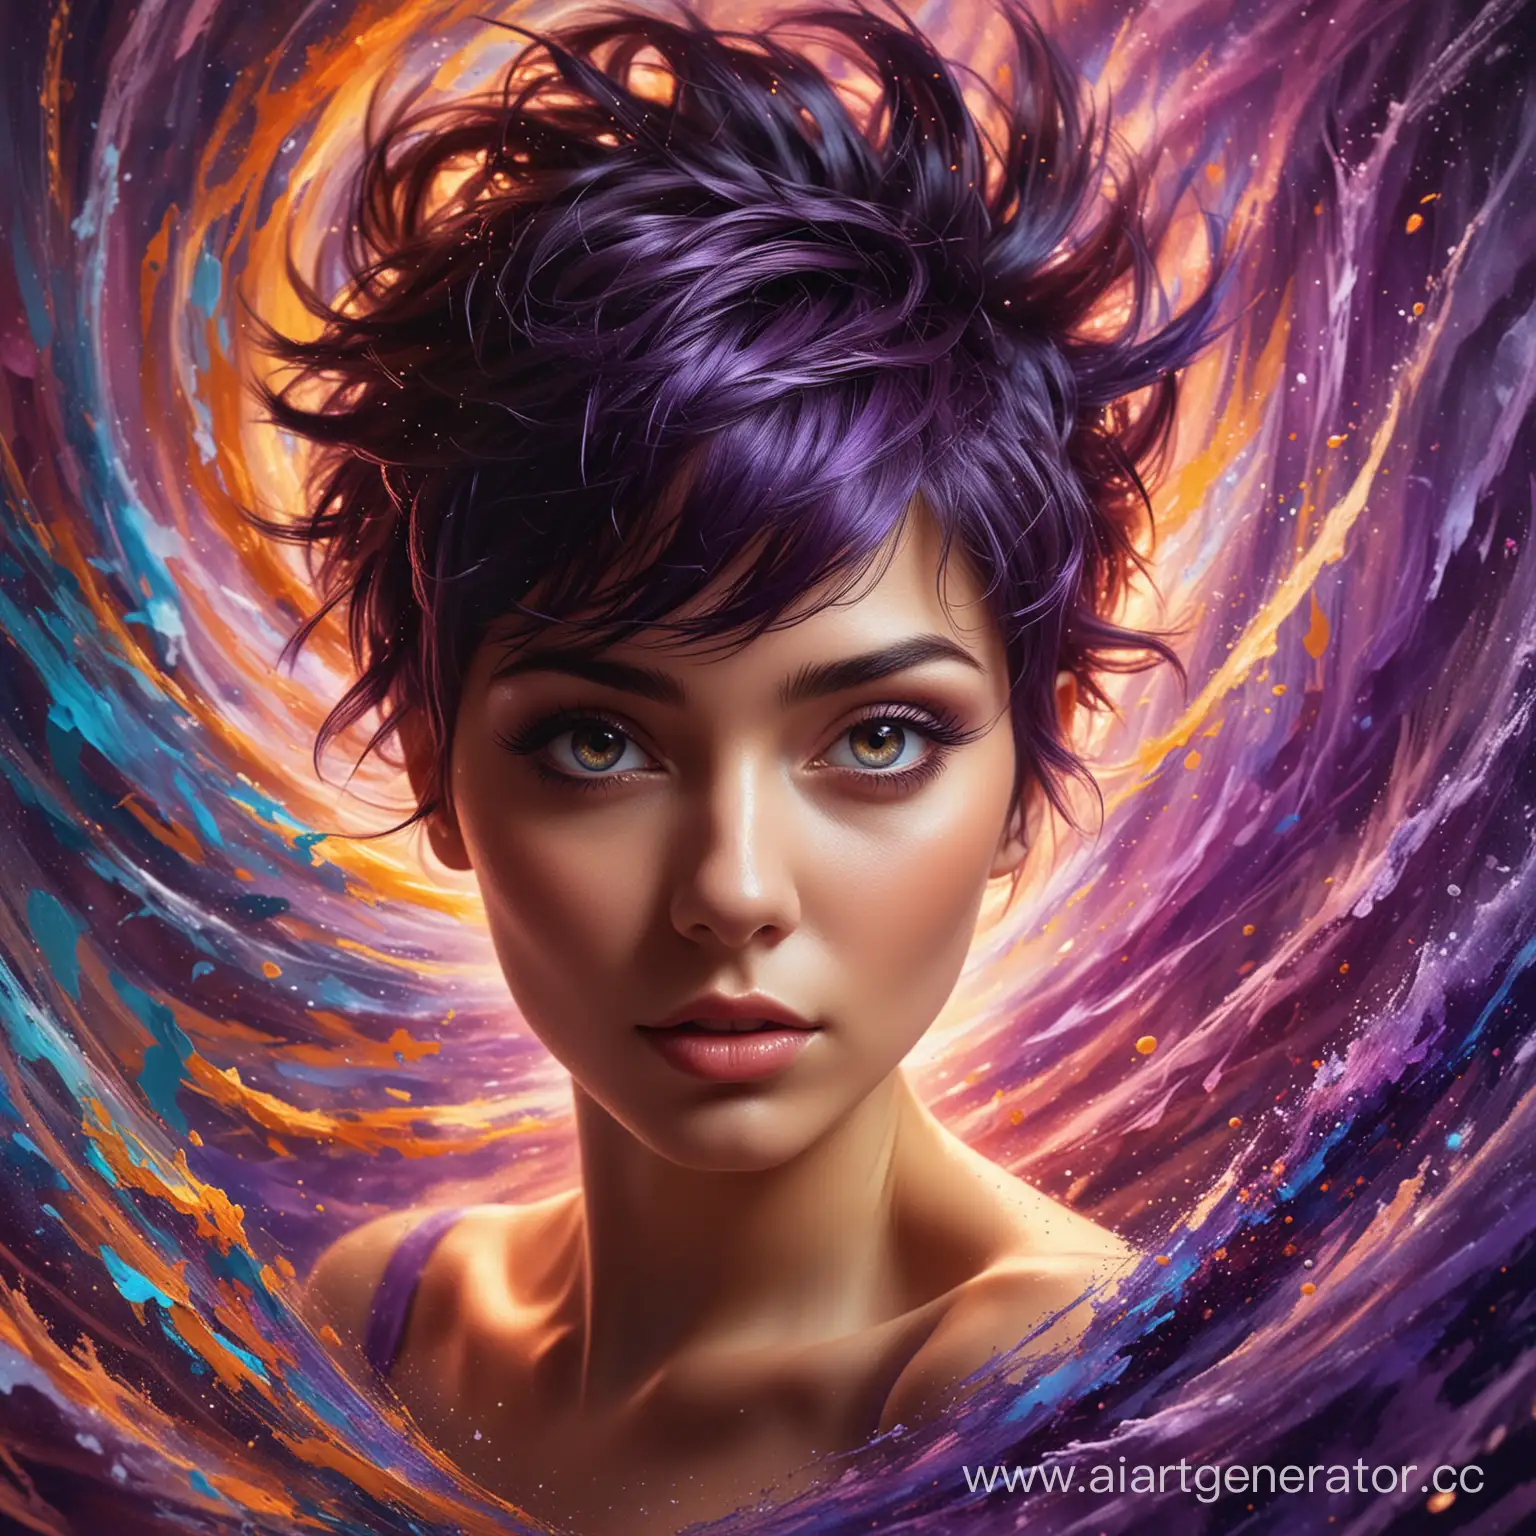  Symphony of Colors
Prompt:

A whirlwind of vibrant colors explodes across the canvas, forming a swirling vortex.
The woman with violet eyes emerges from the center, her form composed entirely of shimmering light.
Her dark pixie hair dances with the colors, creating a mesmerizing spectacle.
Focus on the dynamic movement and the harmonious blend of colors.
